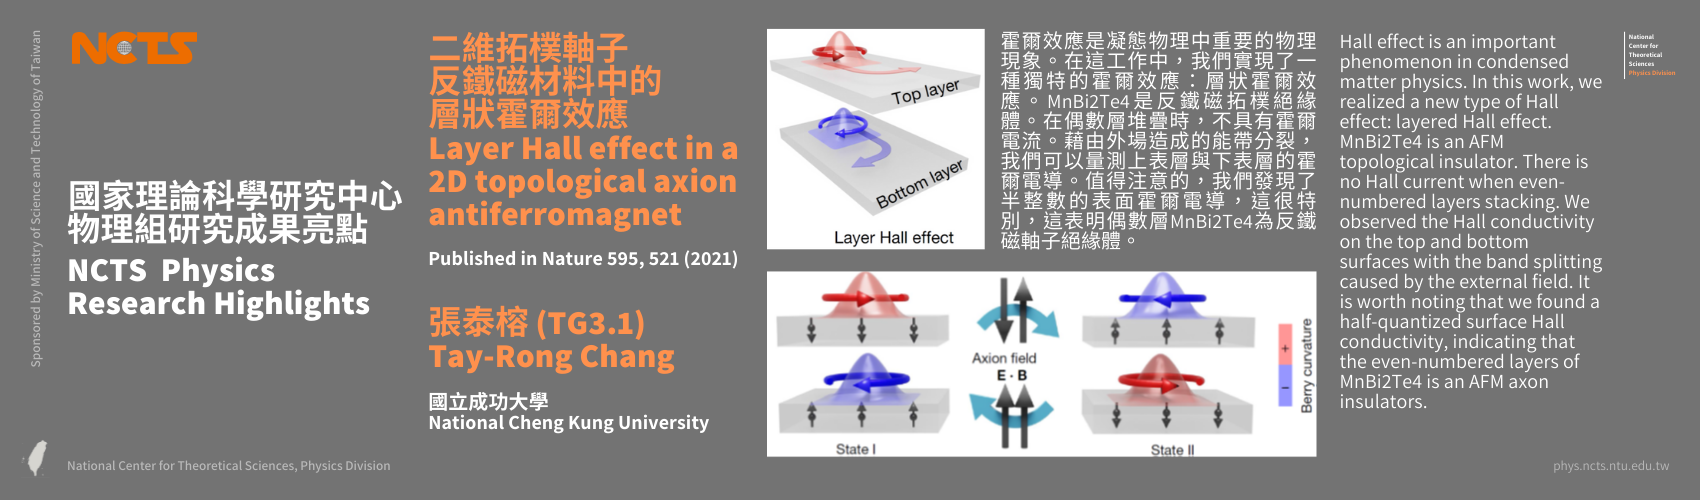 NCTS Physics Research Highlights - Tay-Rong Chang "Layer Hall effect in a 2D topological axion antiferromagnet (2021)"